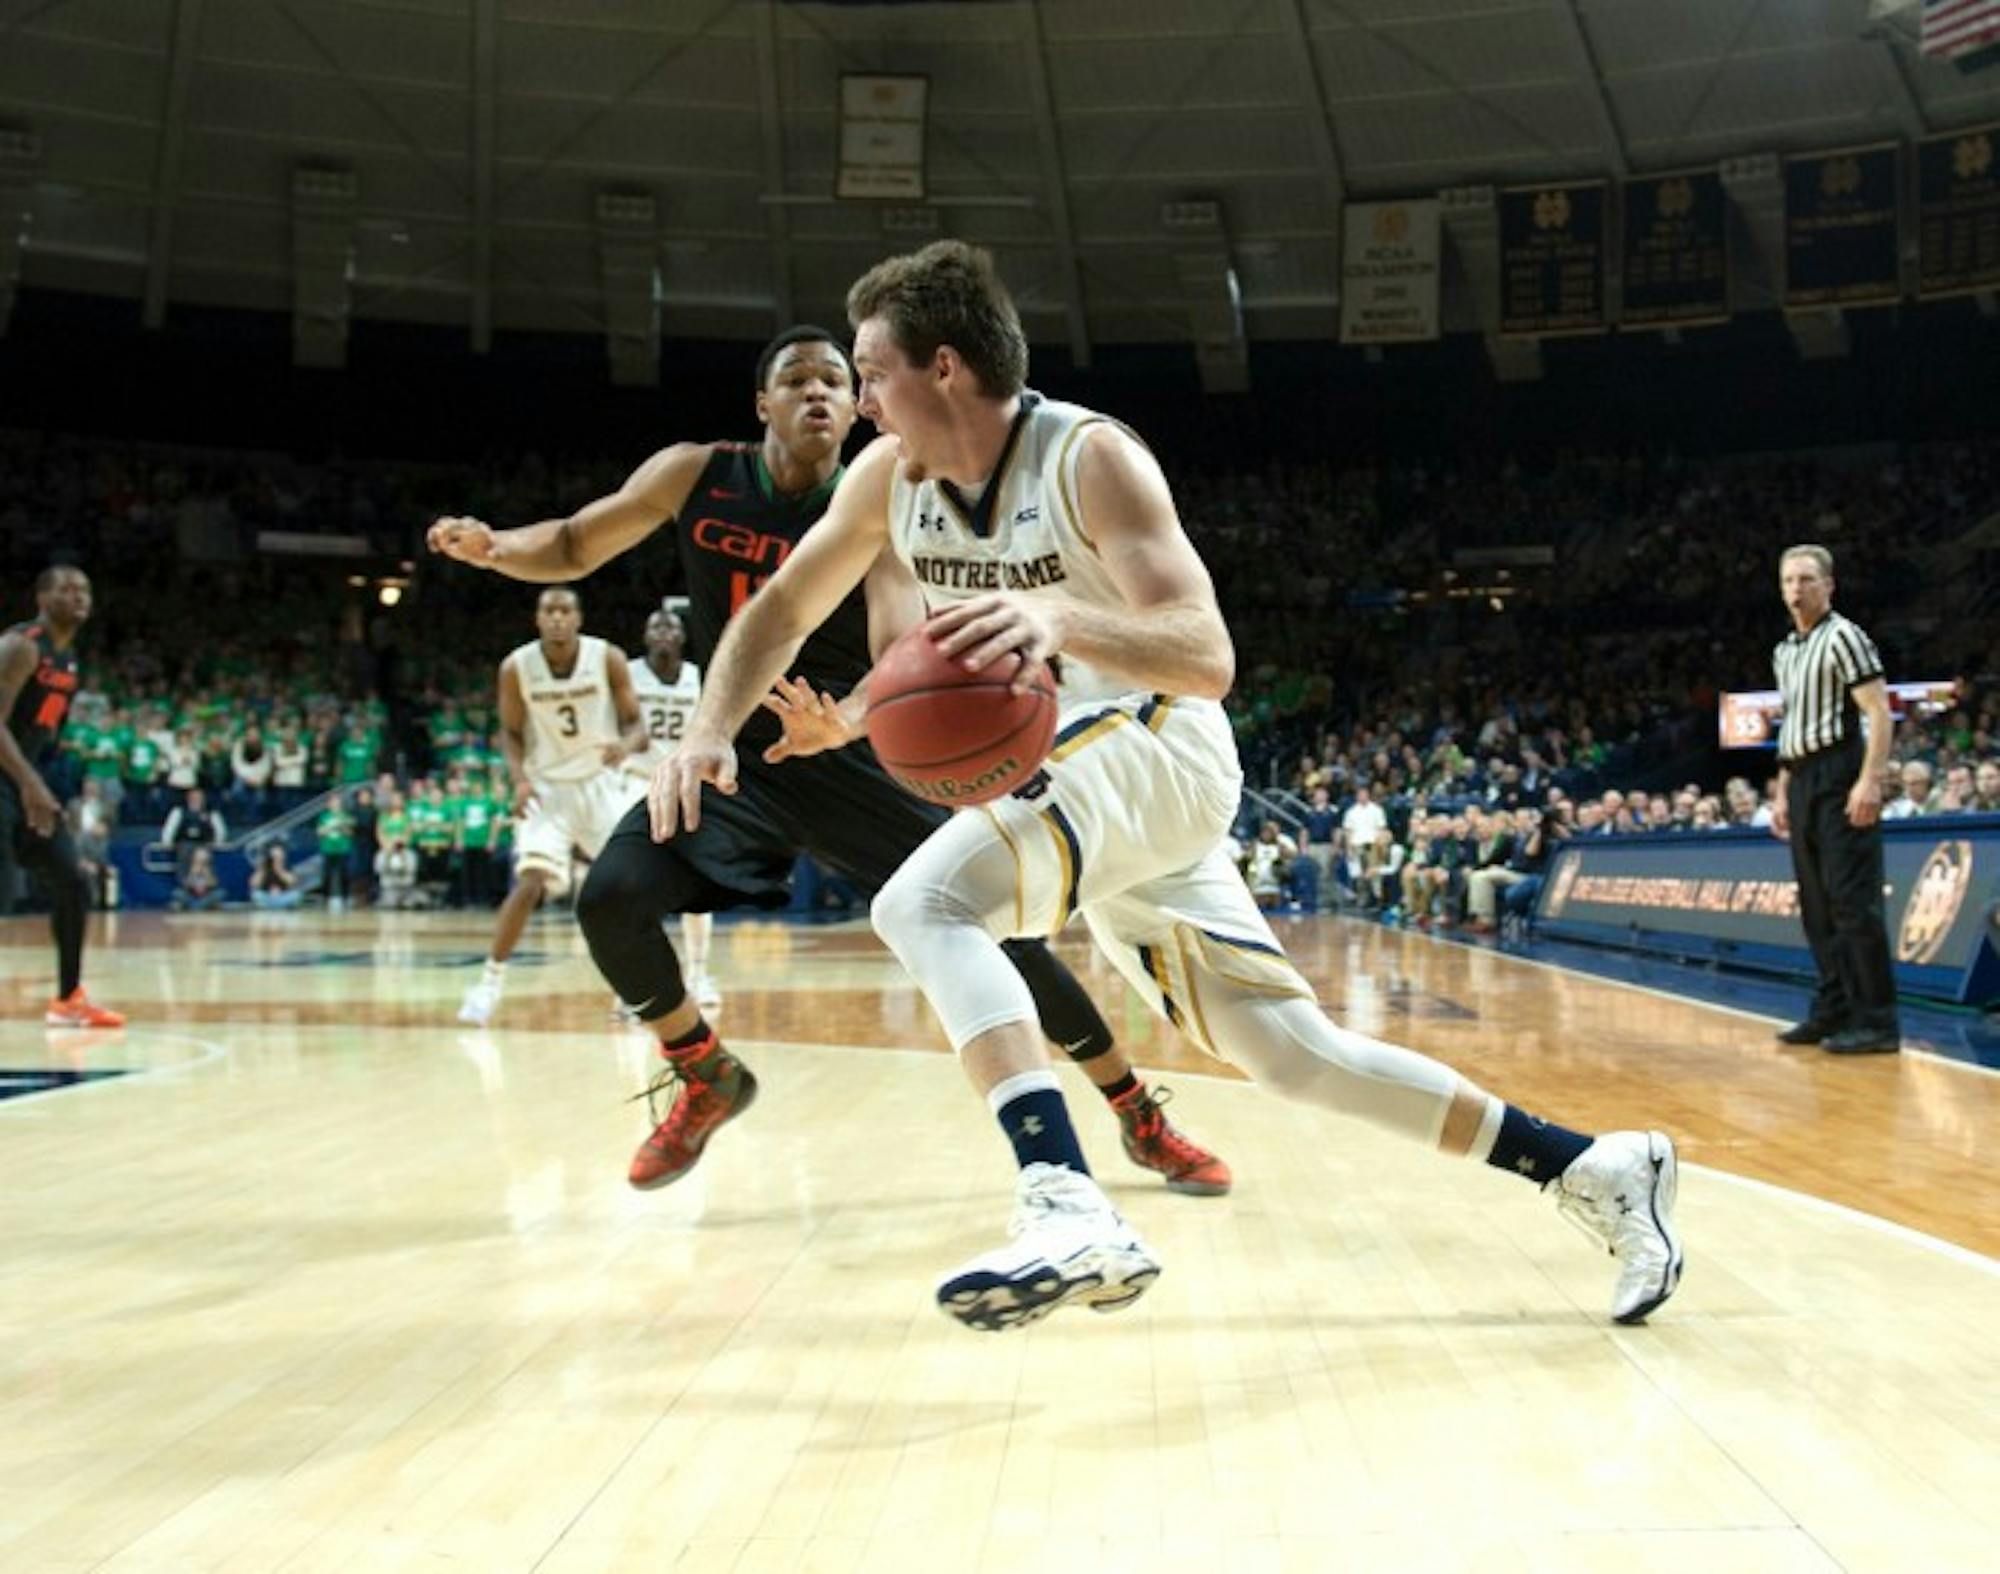 Irish senior guard/forward Pat Connaughton drives past a defender during Notre Dame's 75-70 victory over Miami on Jan. 17 at Purcell Pavilion. Connaughton finished the game with 10 points and 11 rebounds.